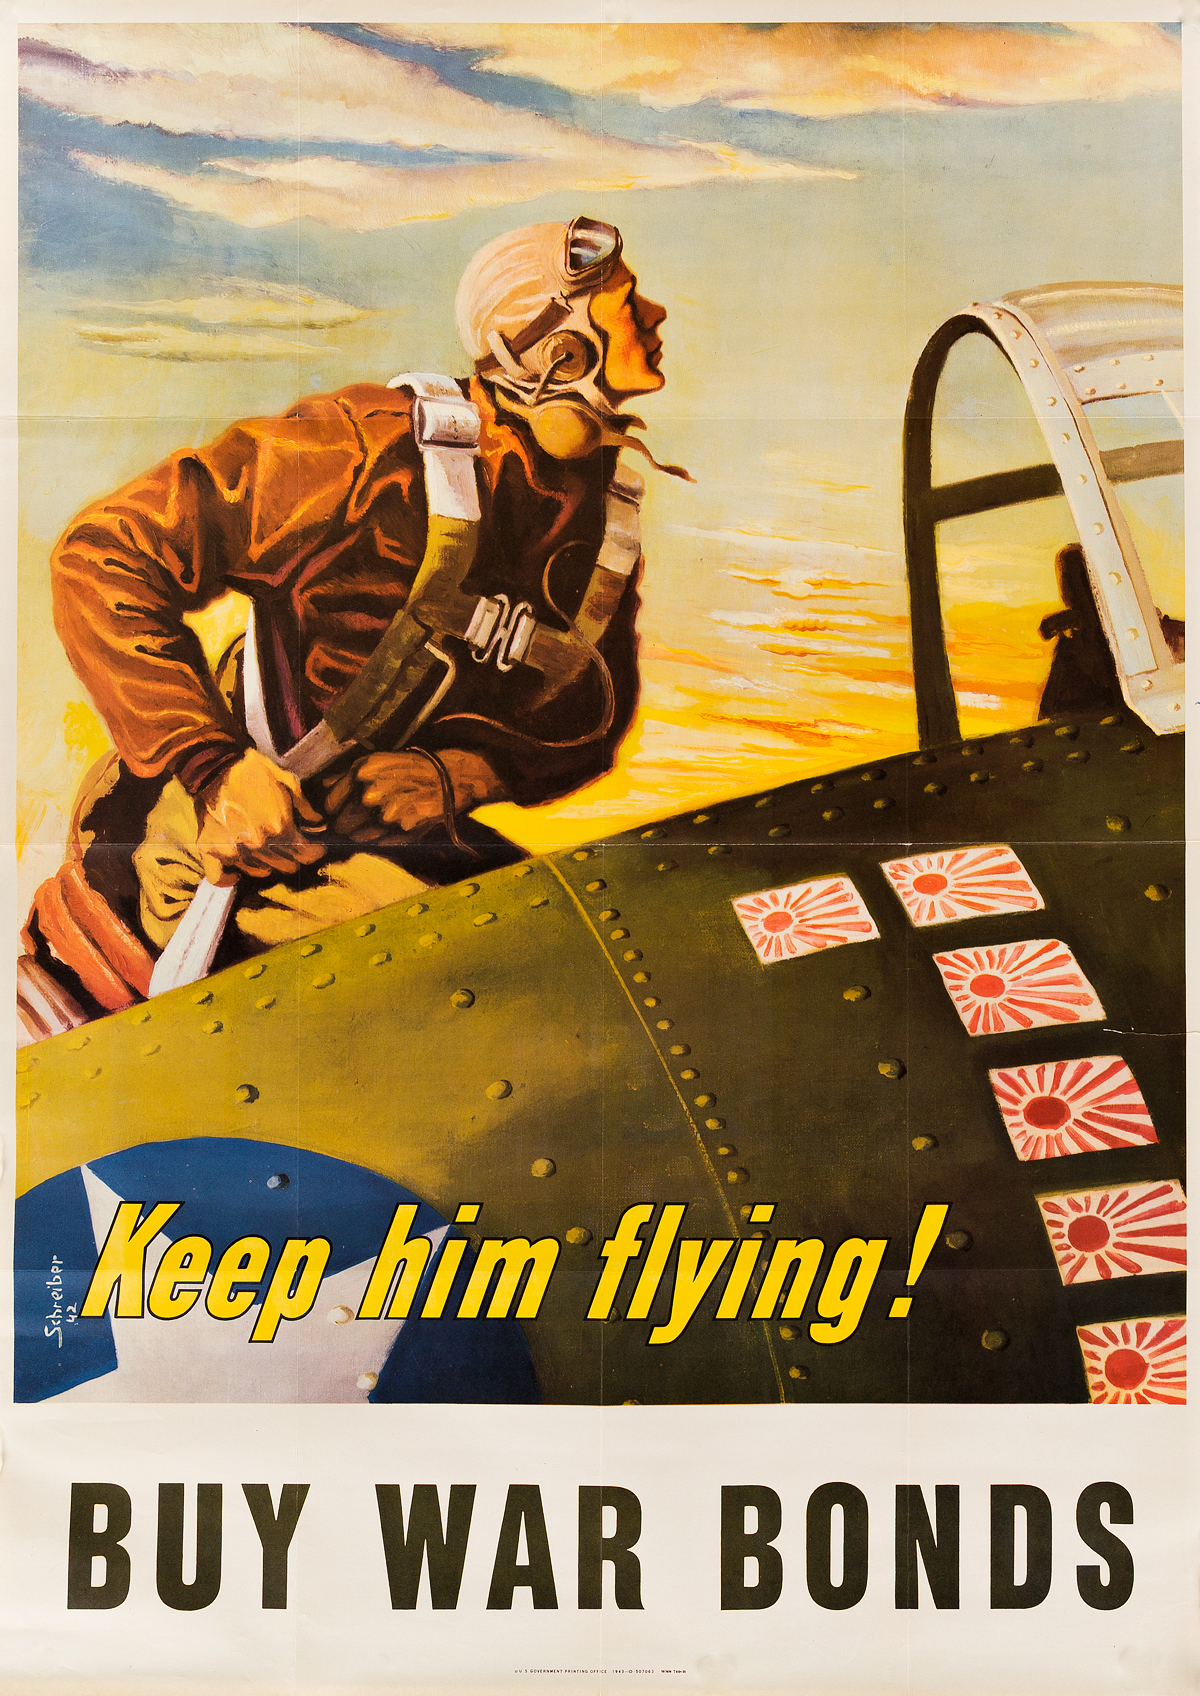 GEORGES SCHREIBER (1904-1977). KEEP HIM FLYING! / BUY WAR BONDS. 1943. 40x28 inches, 101x72 cm. U.S. Government Printing Office, [Washi